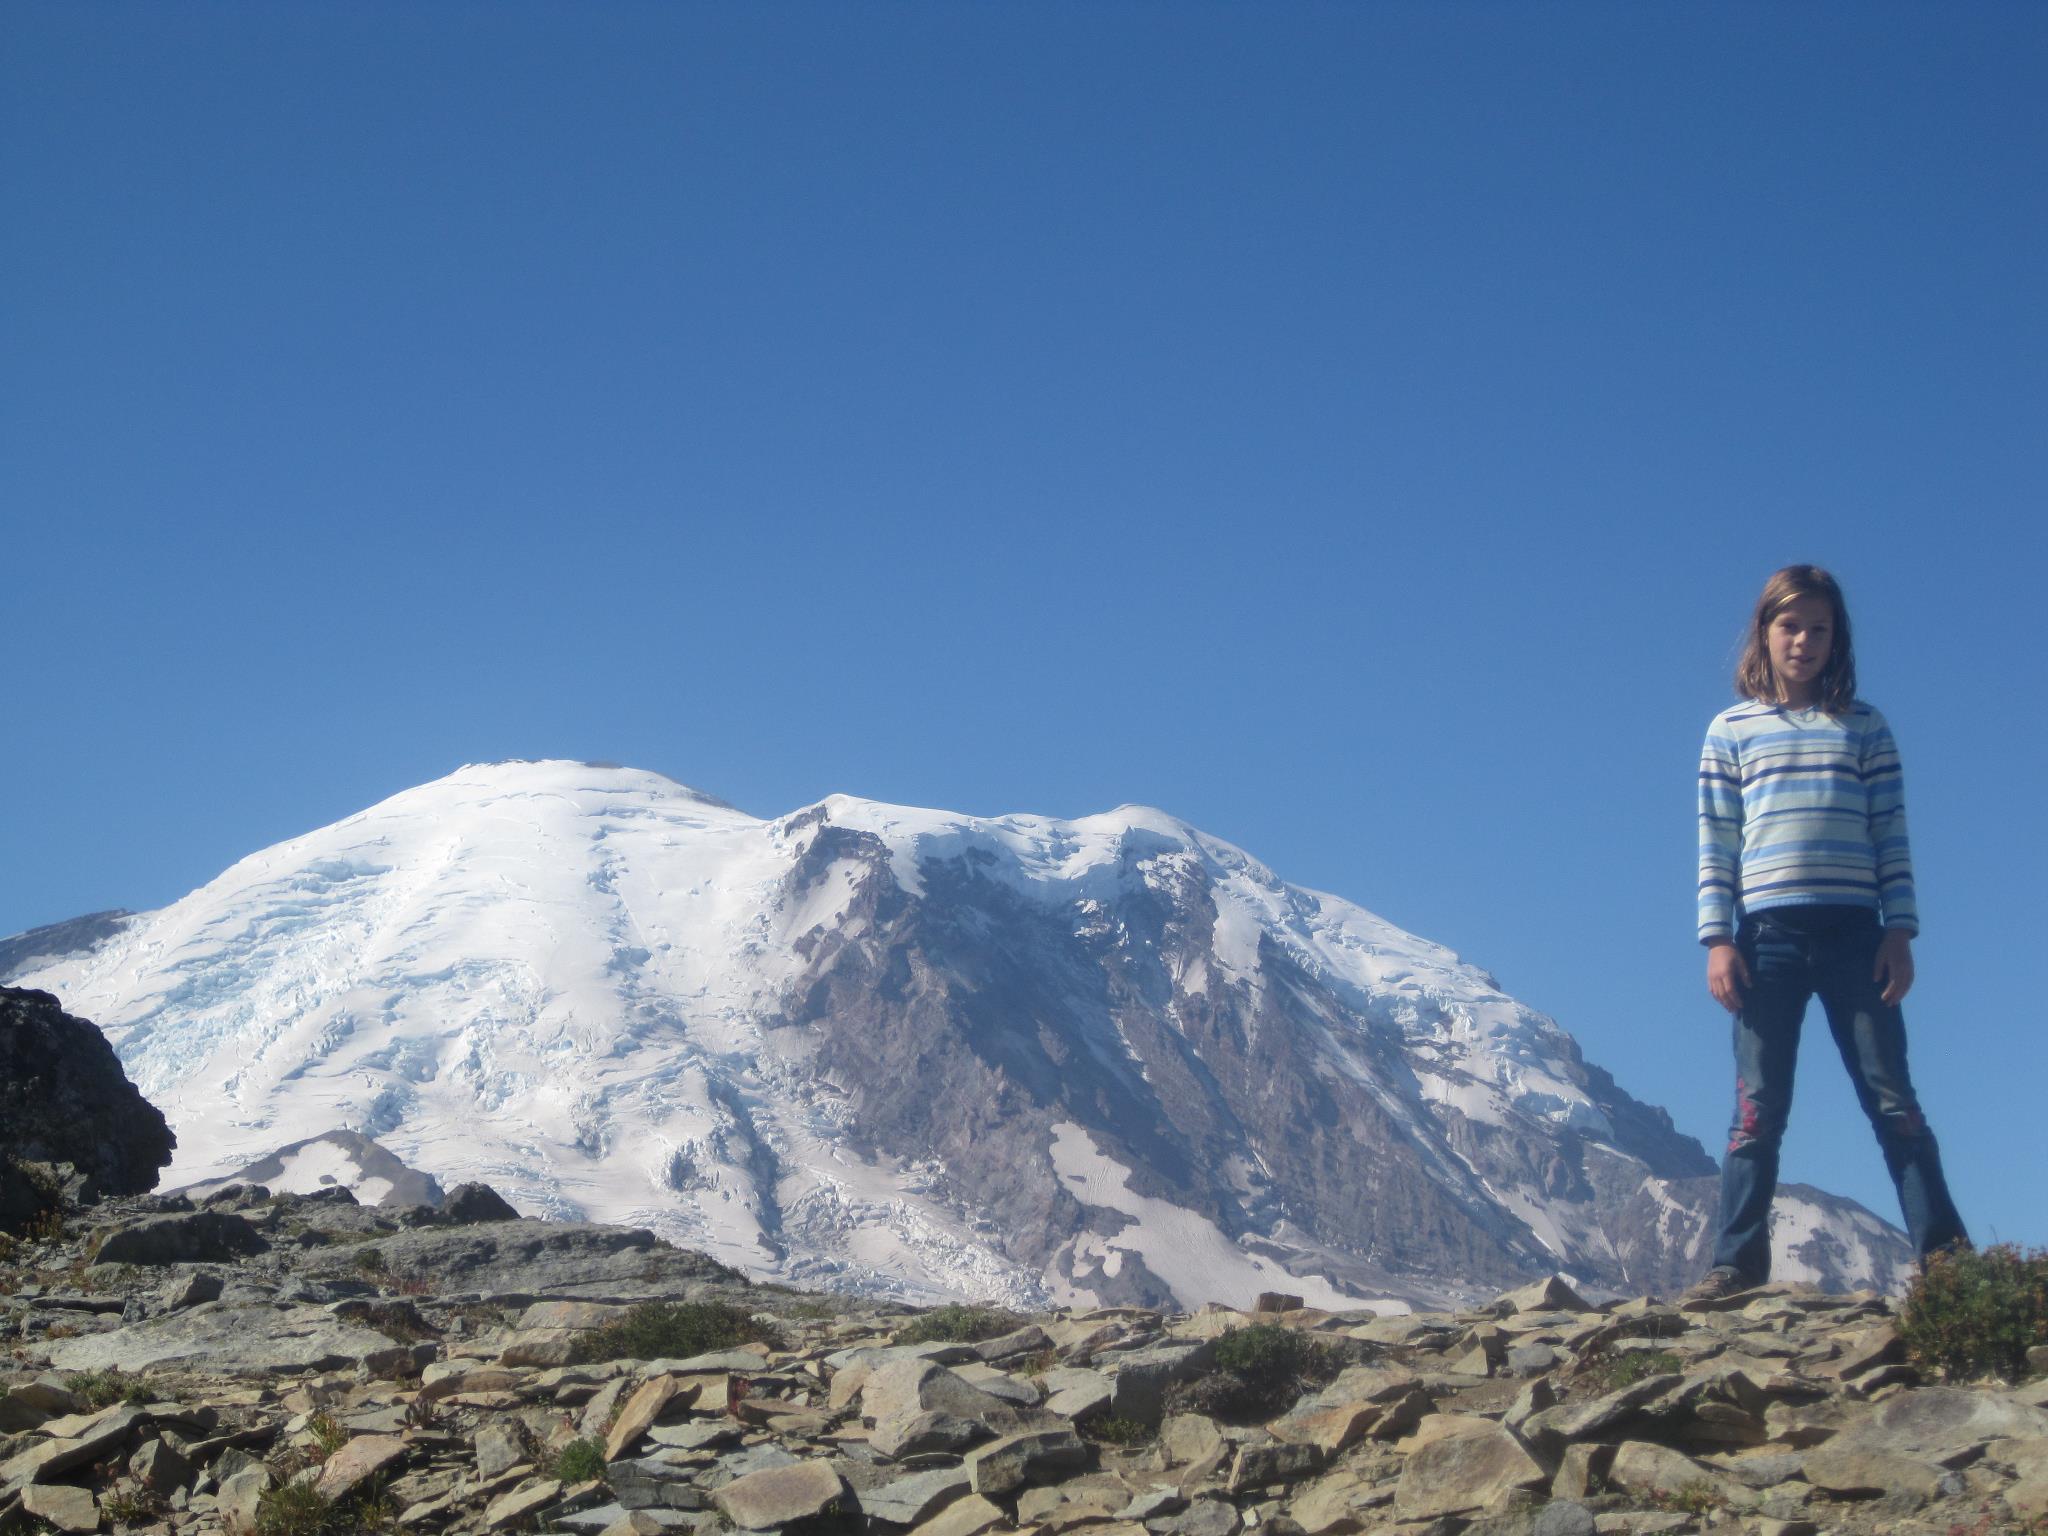 The author's daughter on a hike at Rainier. Credit: Jonathan Shipley